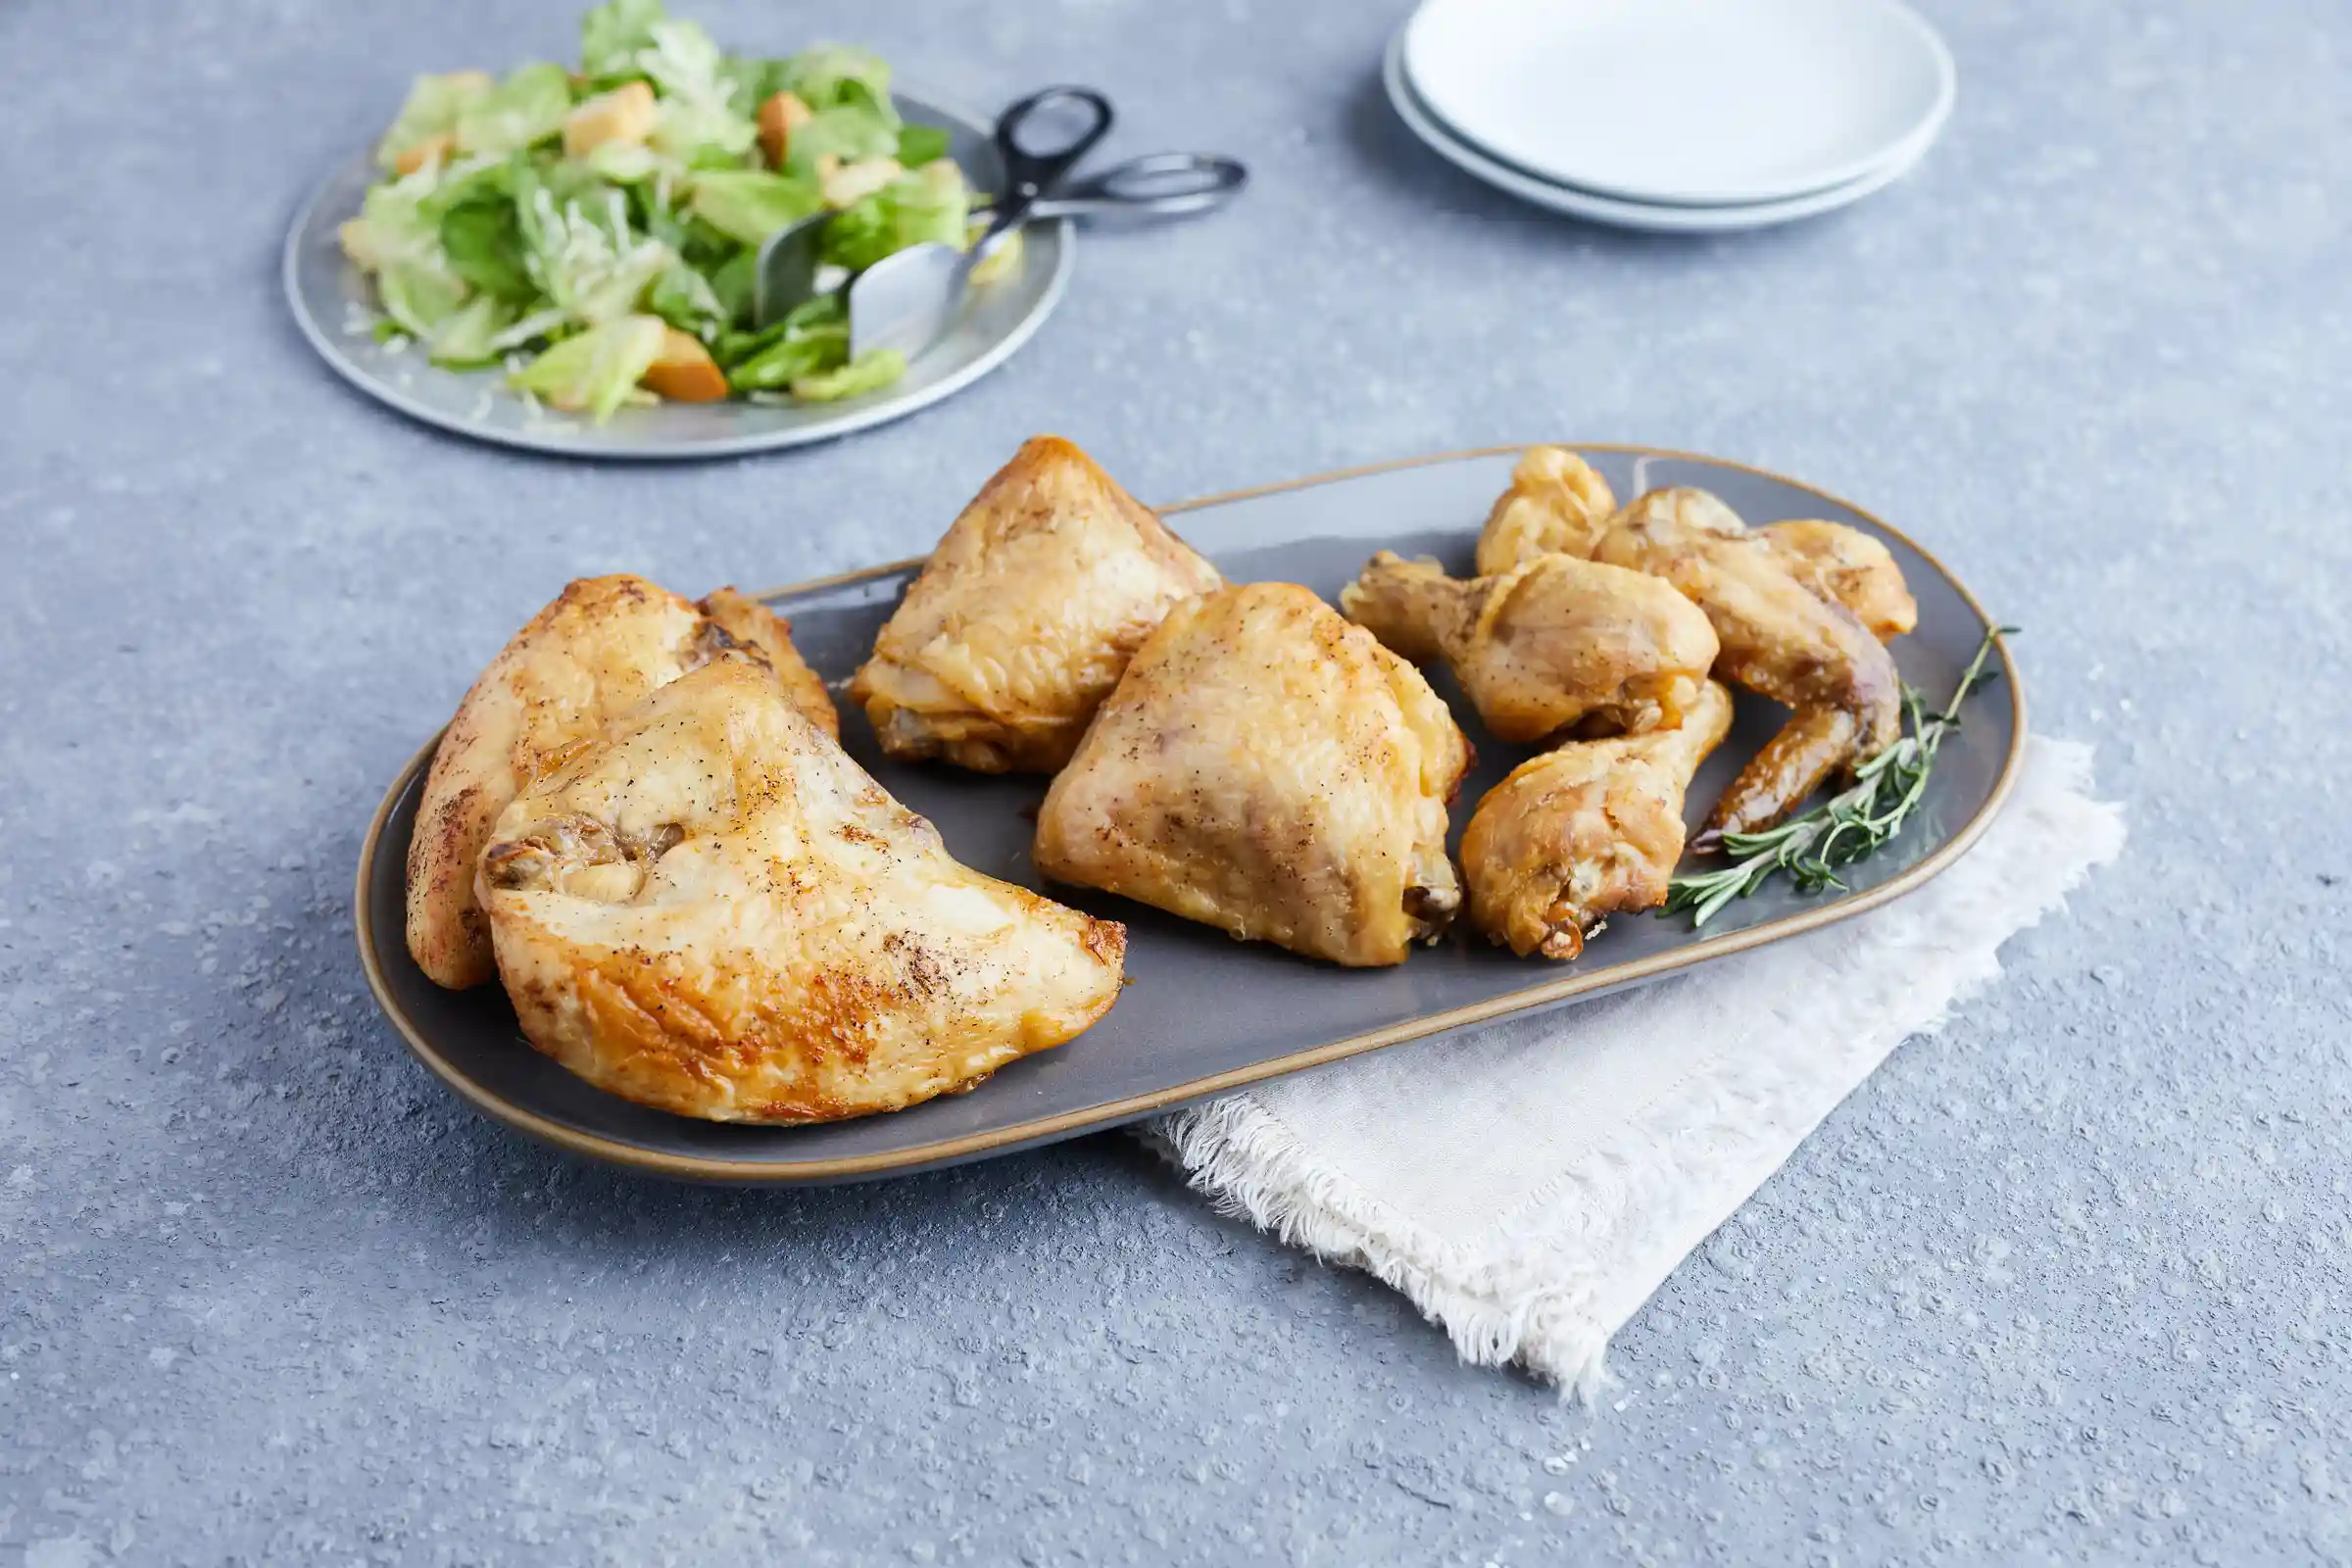 Tyson® ProPortion® IF Unbreaded 8 Piece Cut Chicken_image_01